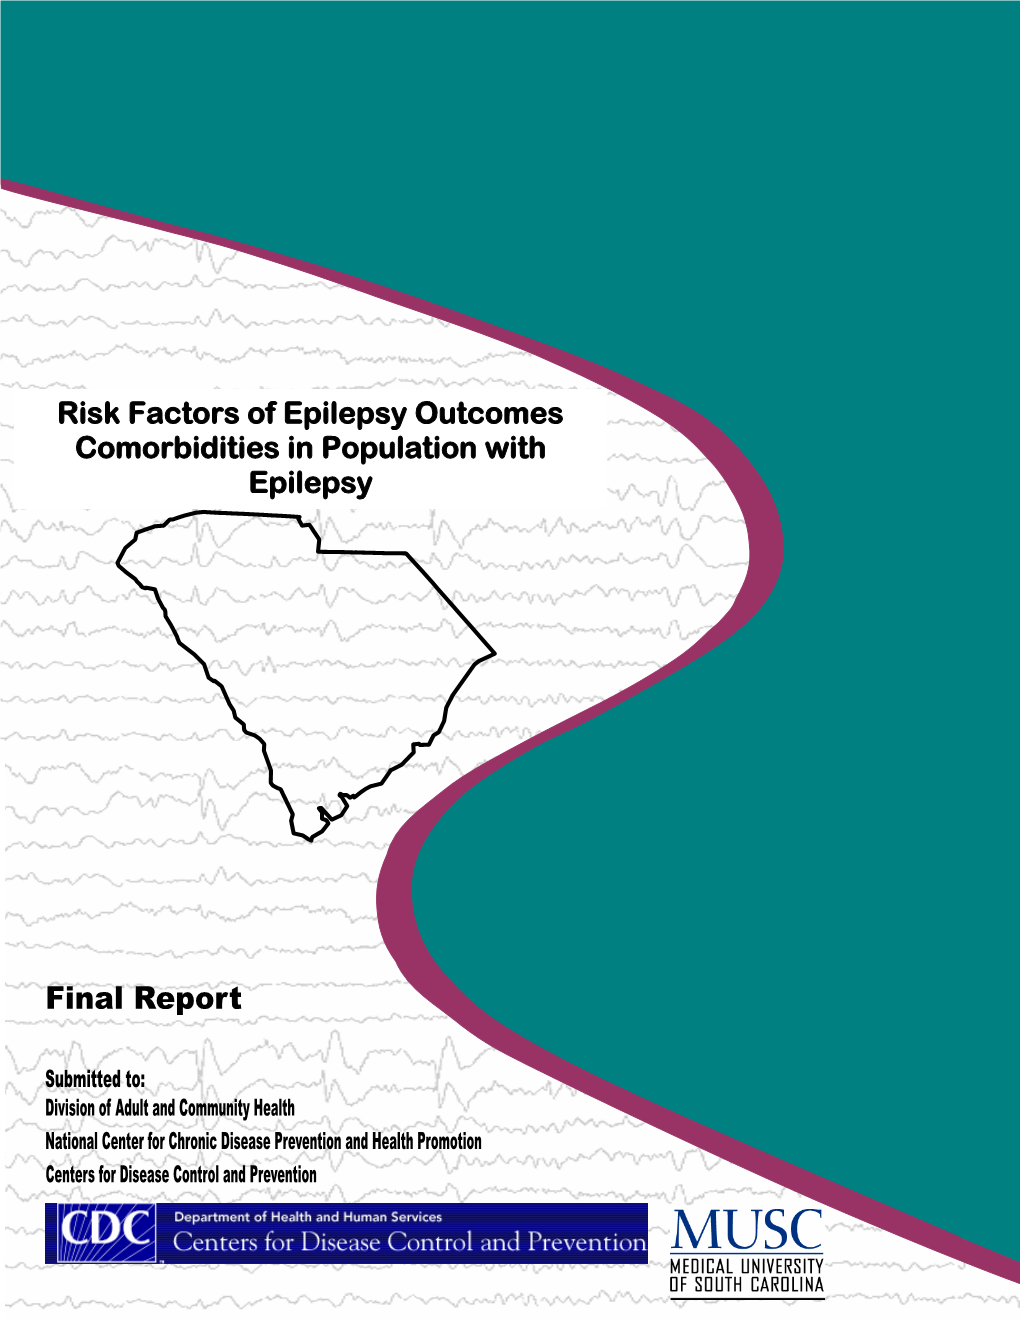 Risk Factors of Epilepsy Outcomes Comorbidities in Population With